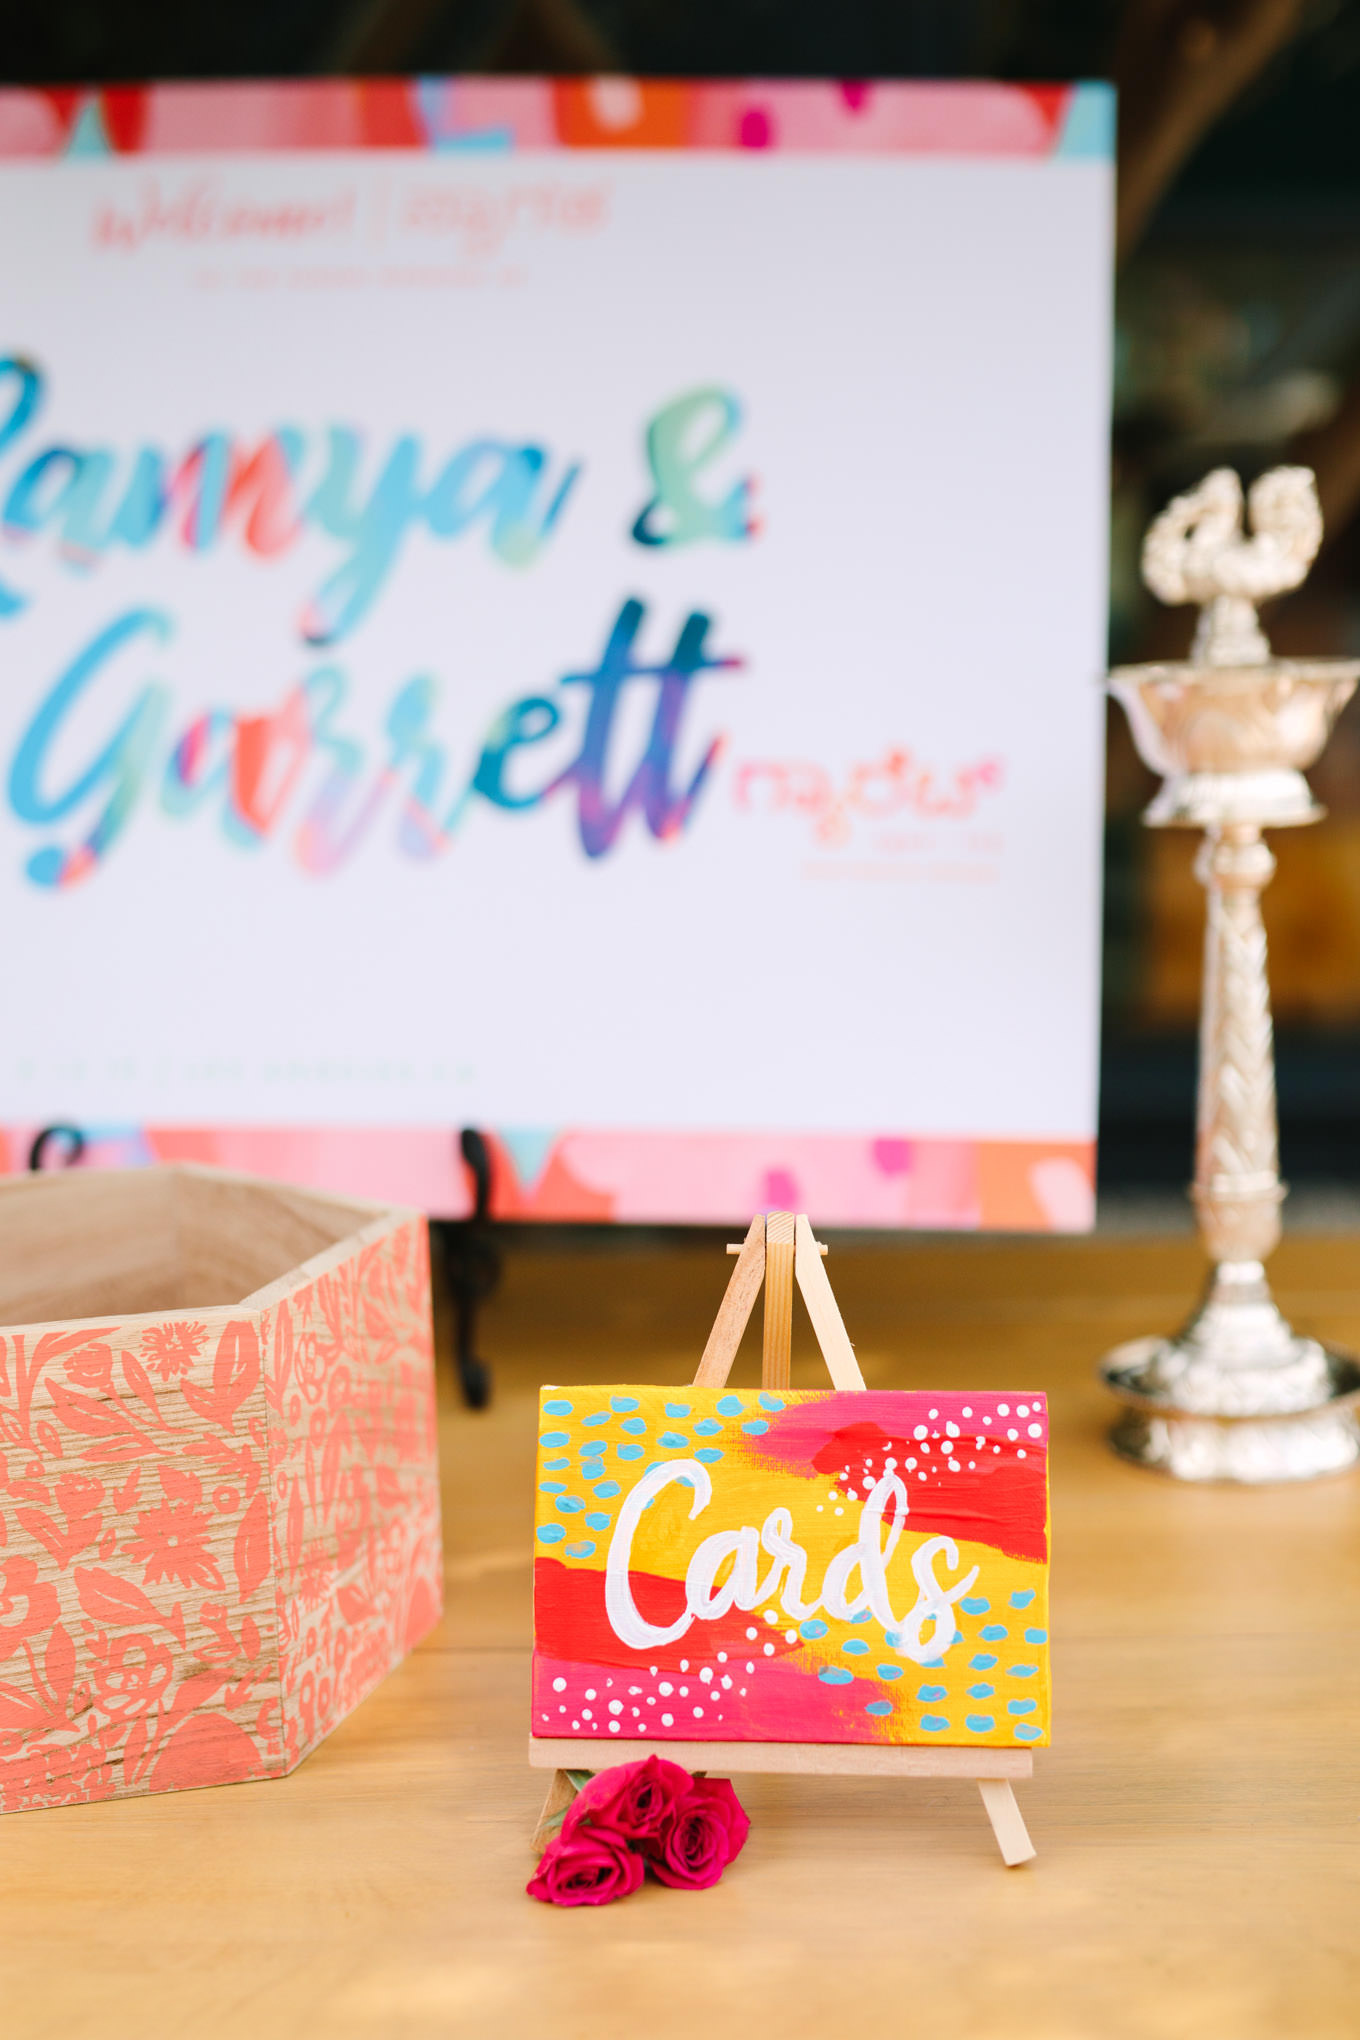 Custom painted card sign. Two Disney artists create a unique and colorful Indian Fusion wedding at The Fig House Los Angeles, featured on Green Wedding Shoes. | Colorful and elevated wedding inspiration for fun-loving couples in Southern California | #indianwedding #indianfusionwedding #thefighouse #losangeleswedding   Source: Mary Costa Photography | Los Angeles